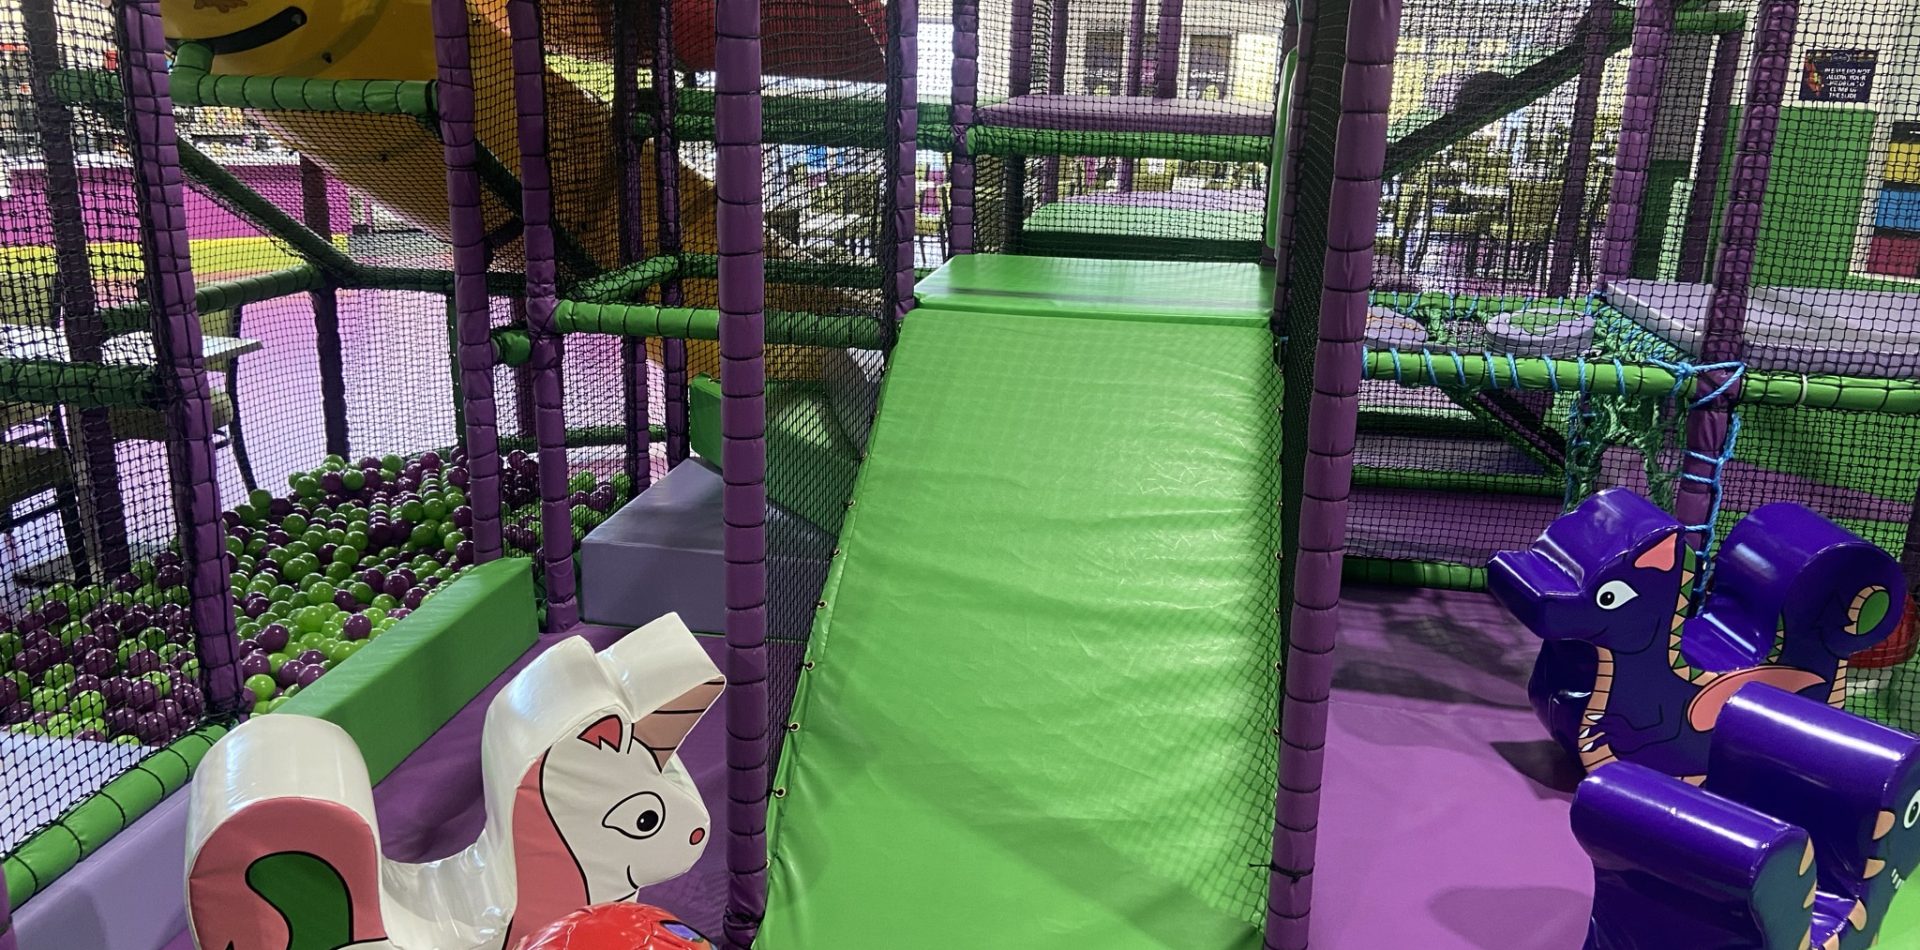 under 4 play area